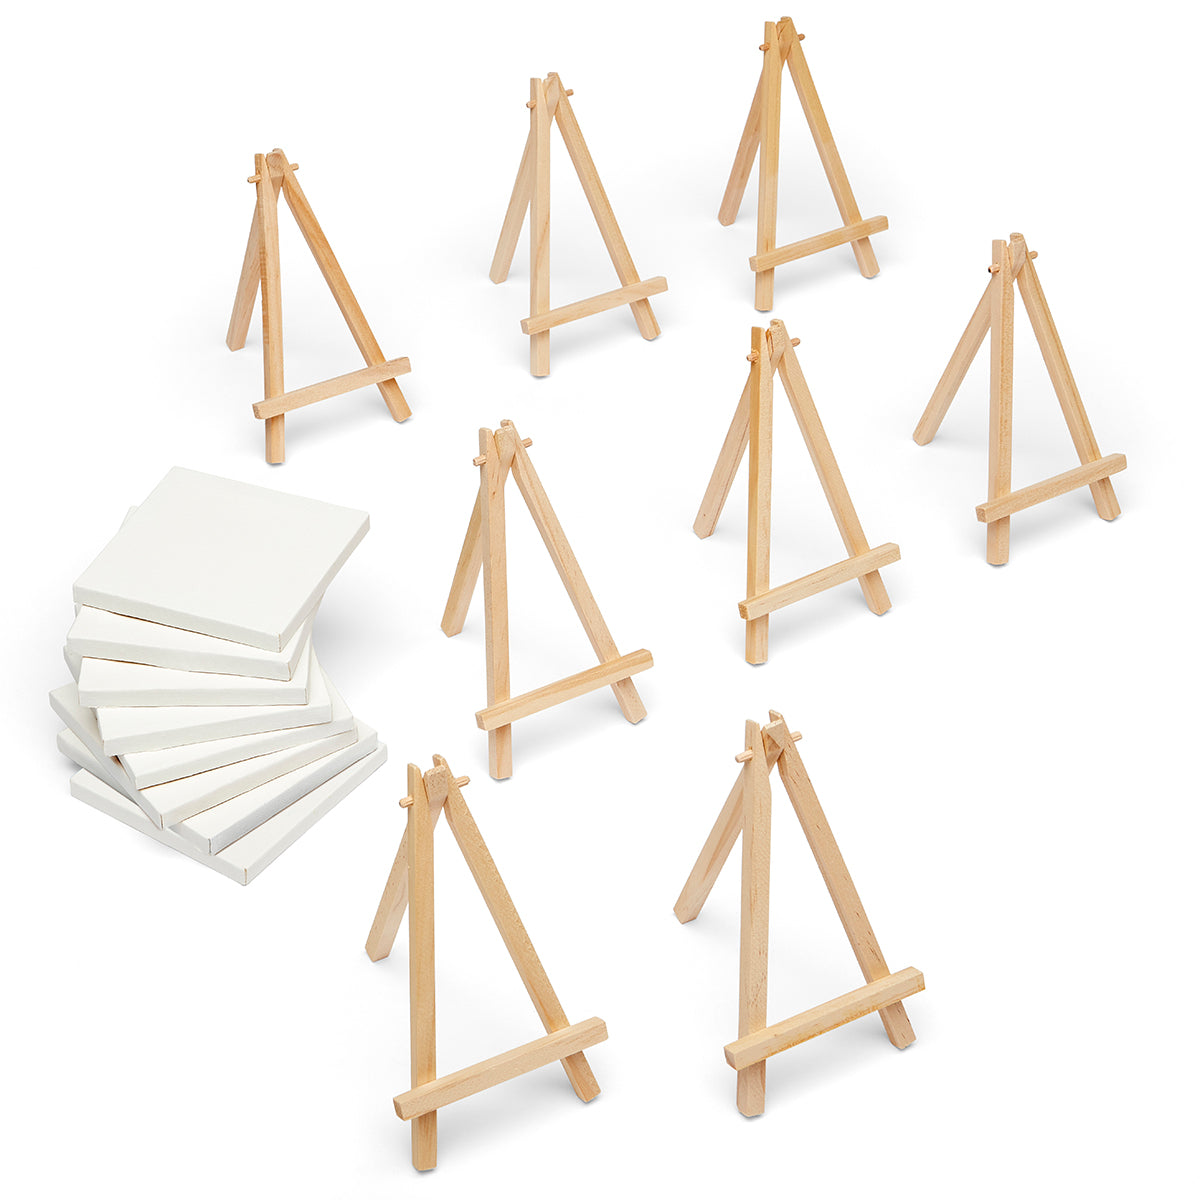 Mini Stretched Canvas With Beech Wood Easel Set 12 Pack 4x4 Inch